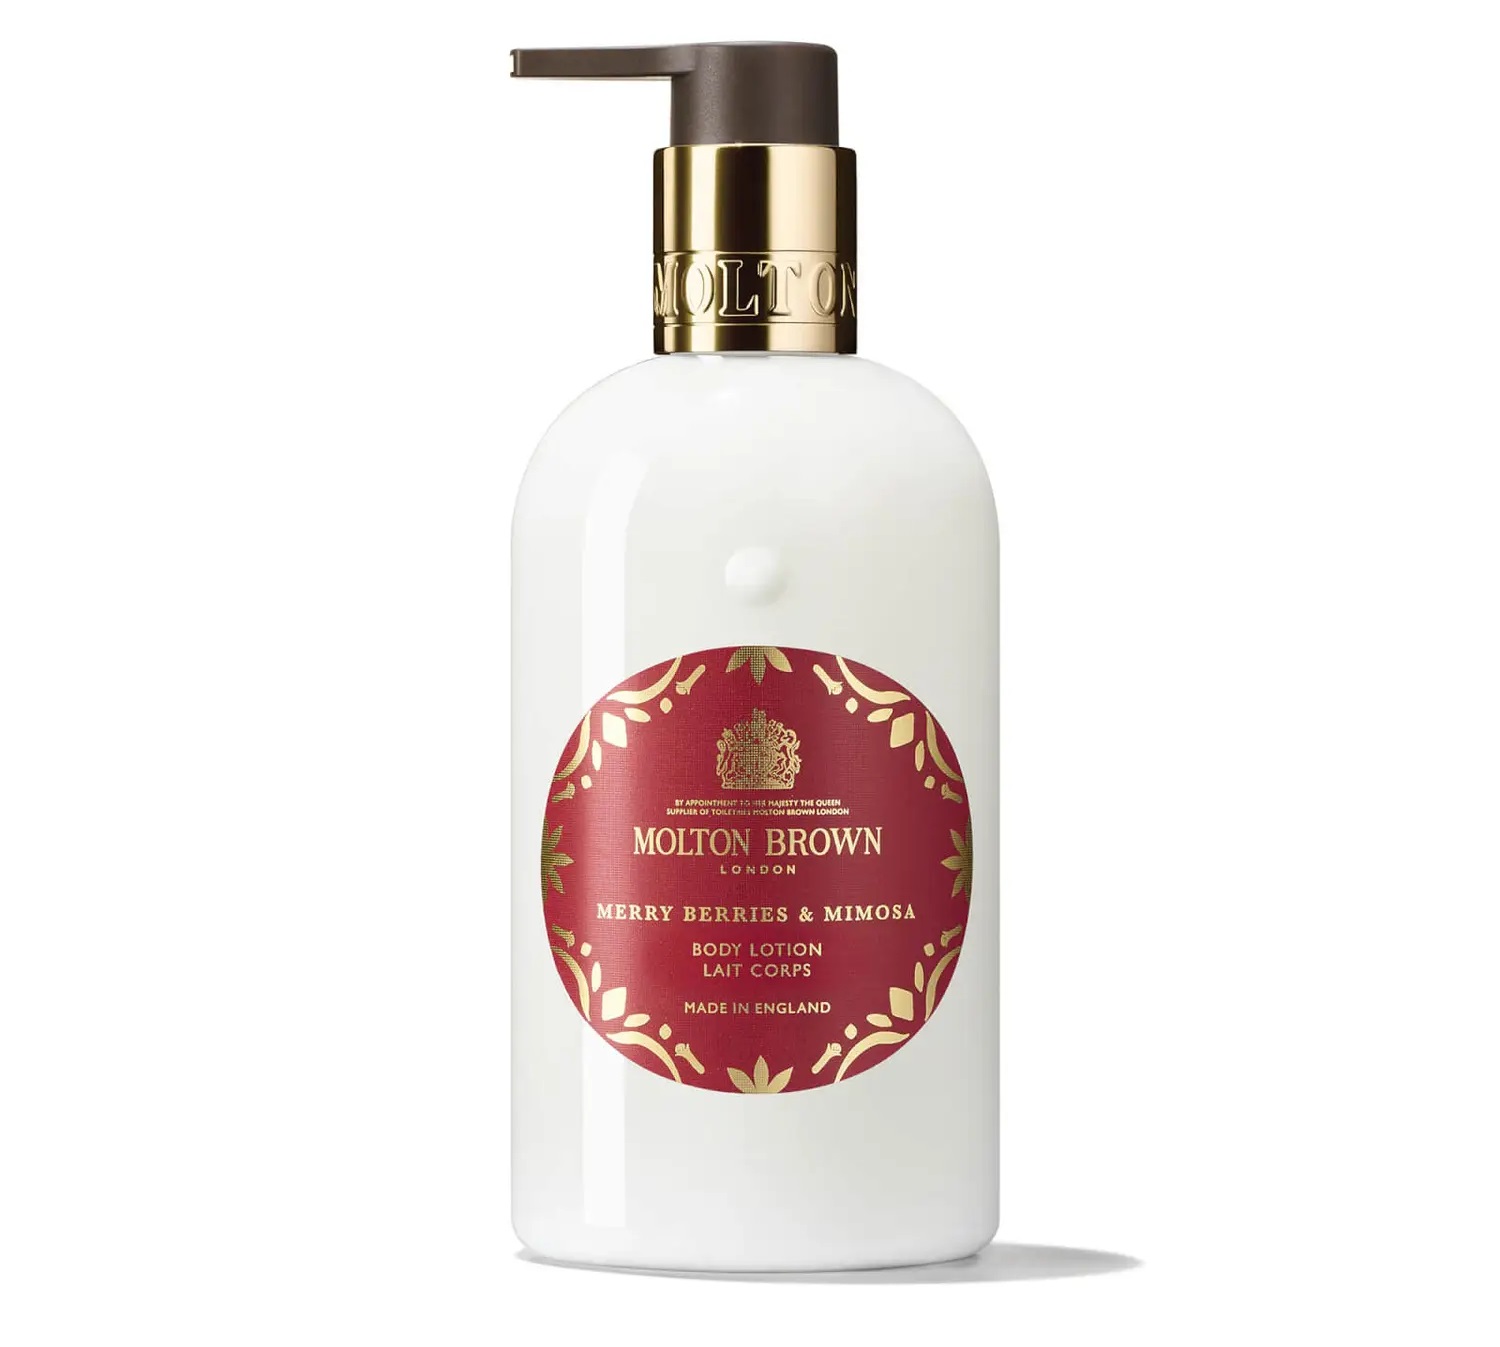 Molton Brown Merry Berries and Mimosa Body Lotion